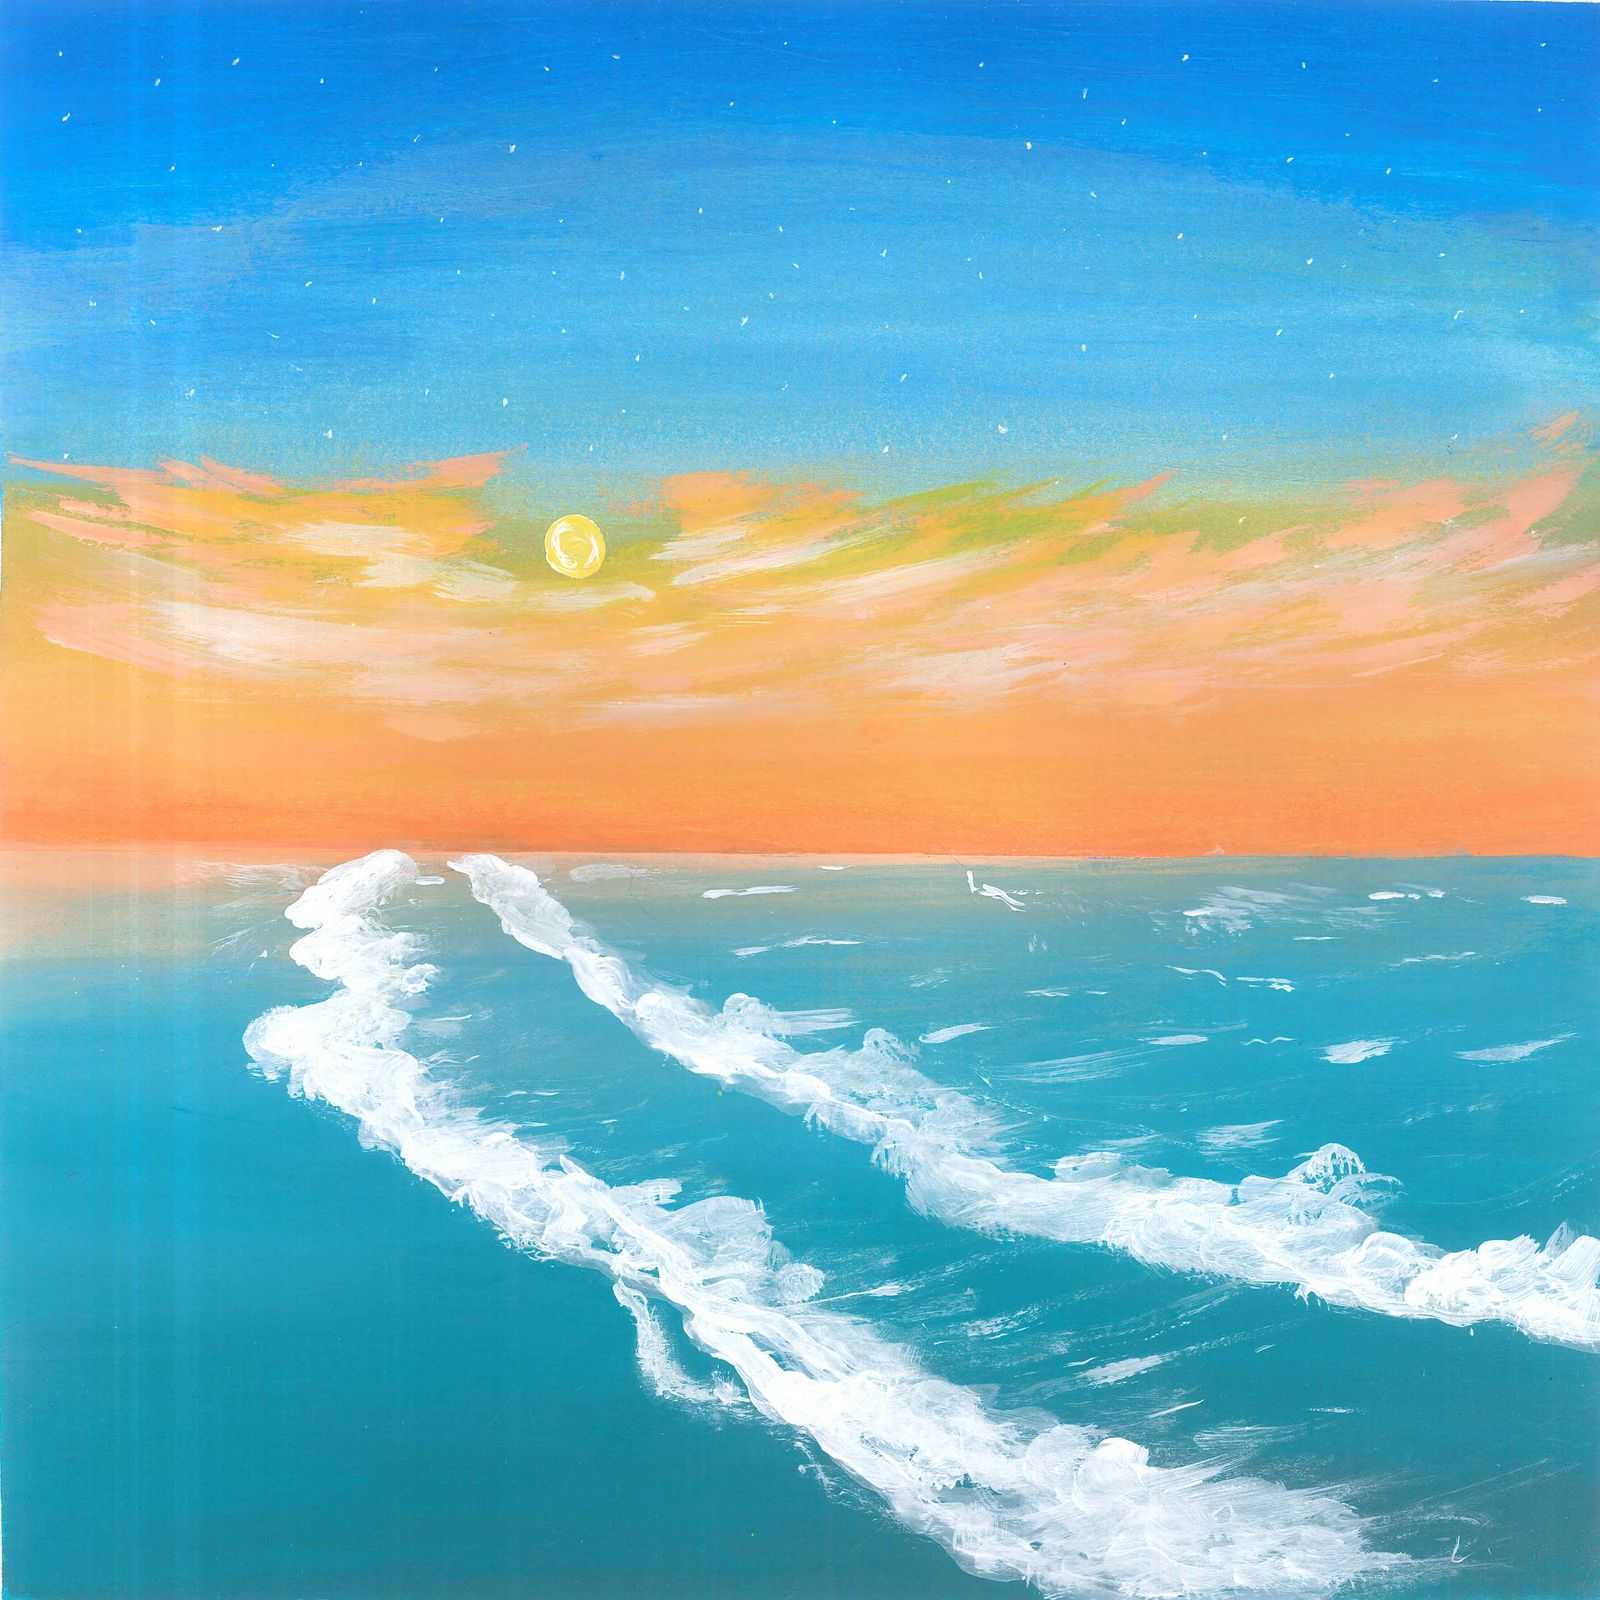 Waves in the Gulf of Thailand - nature landscape painting - earth.fm